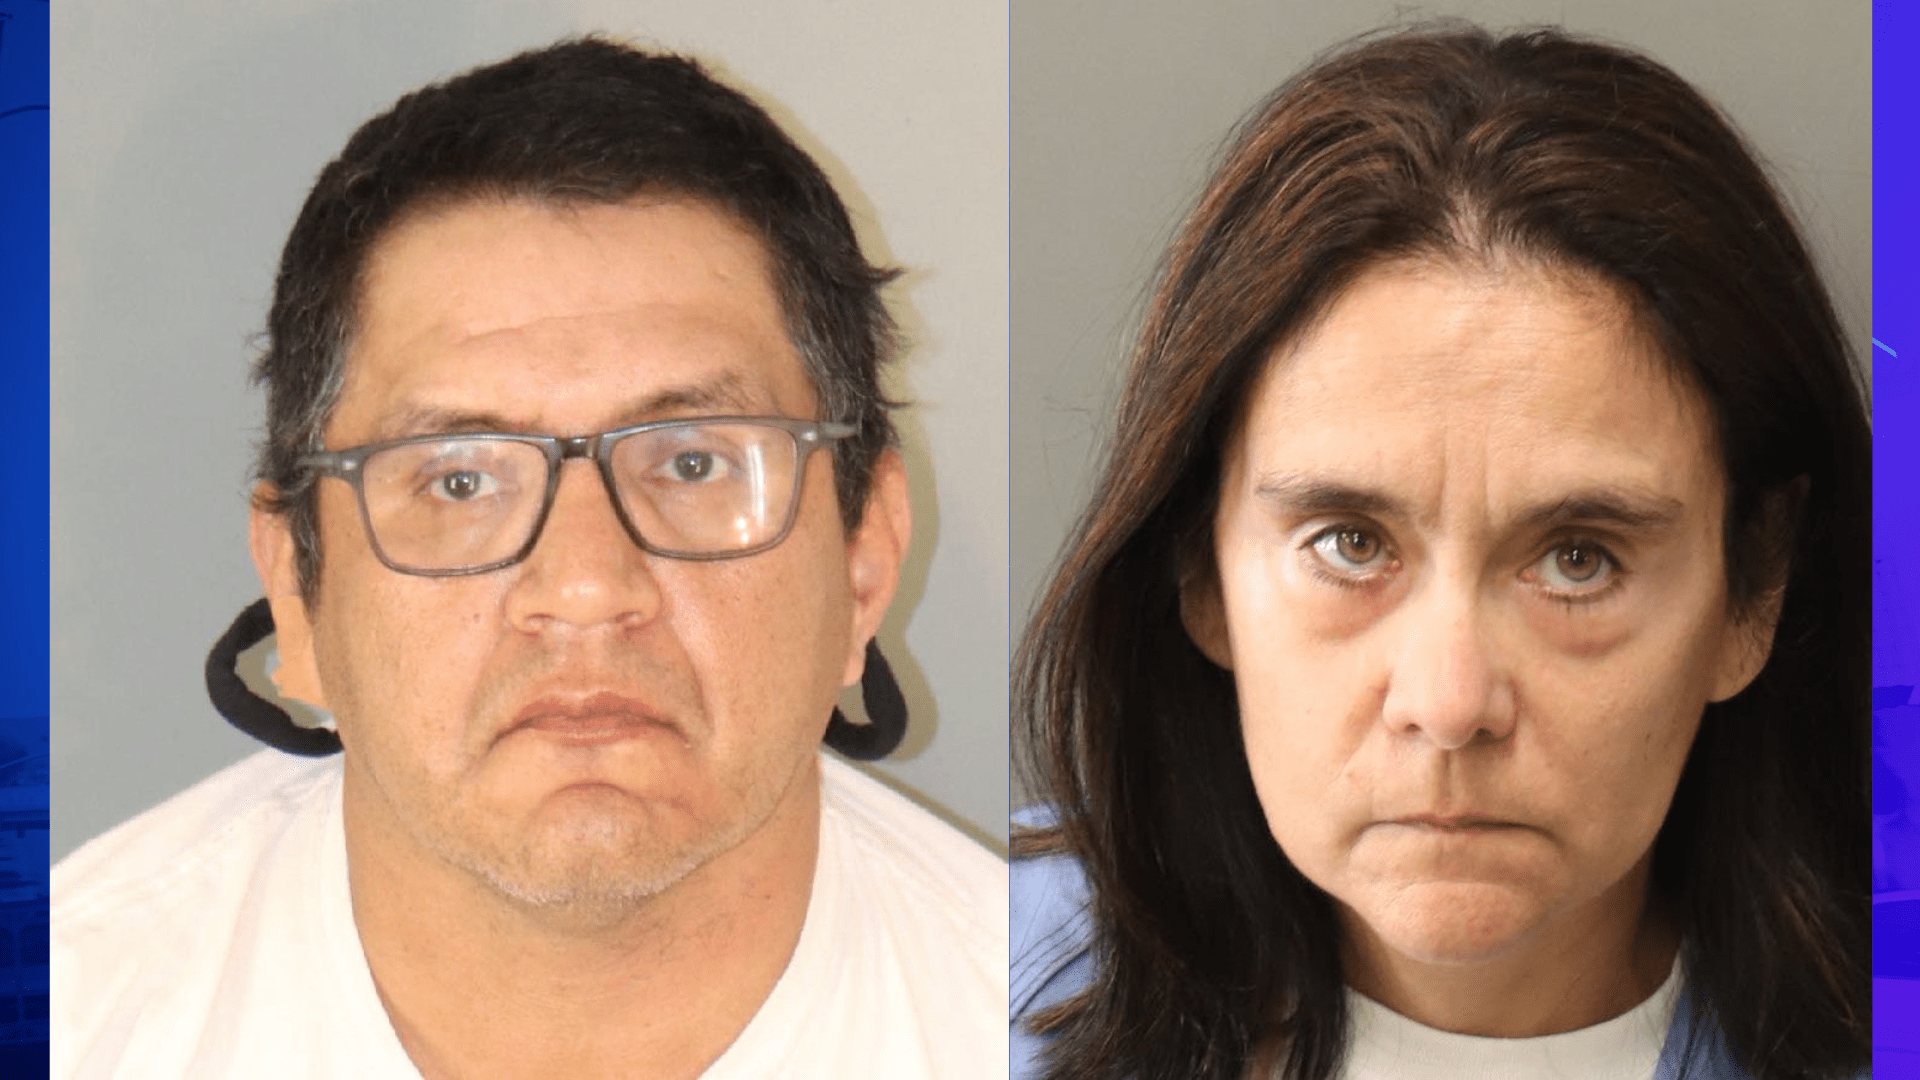 Jose Cruz Martinez, 47 and Dawn Renee Johnson, 48, in booking photos from the Riverside Police Department.